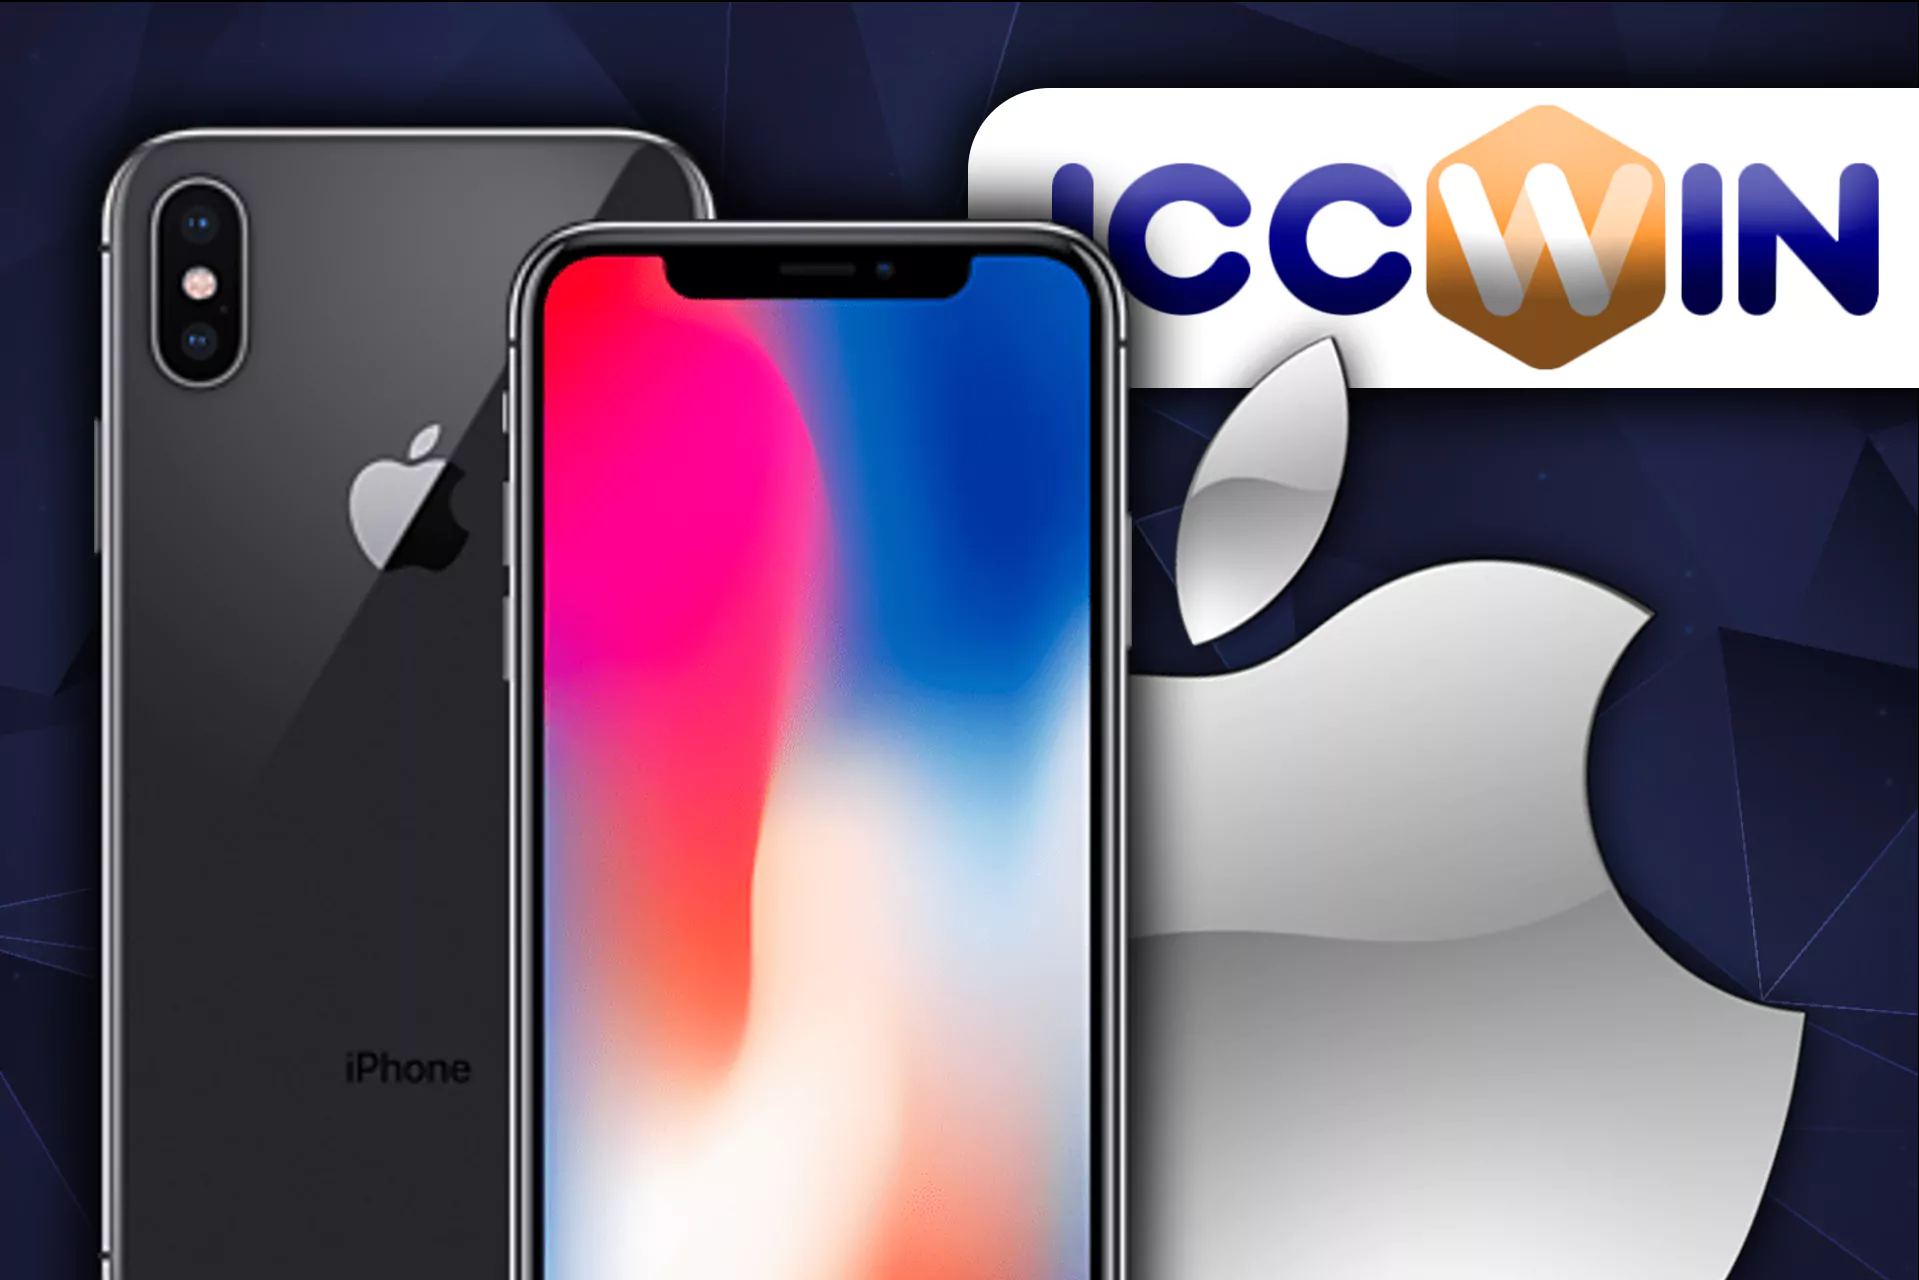 You can install the ICCWIN mobile app on your iPhone or iPad.